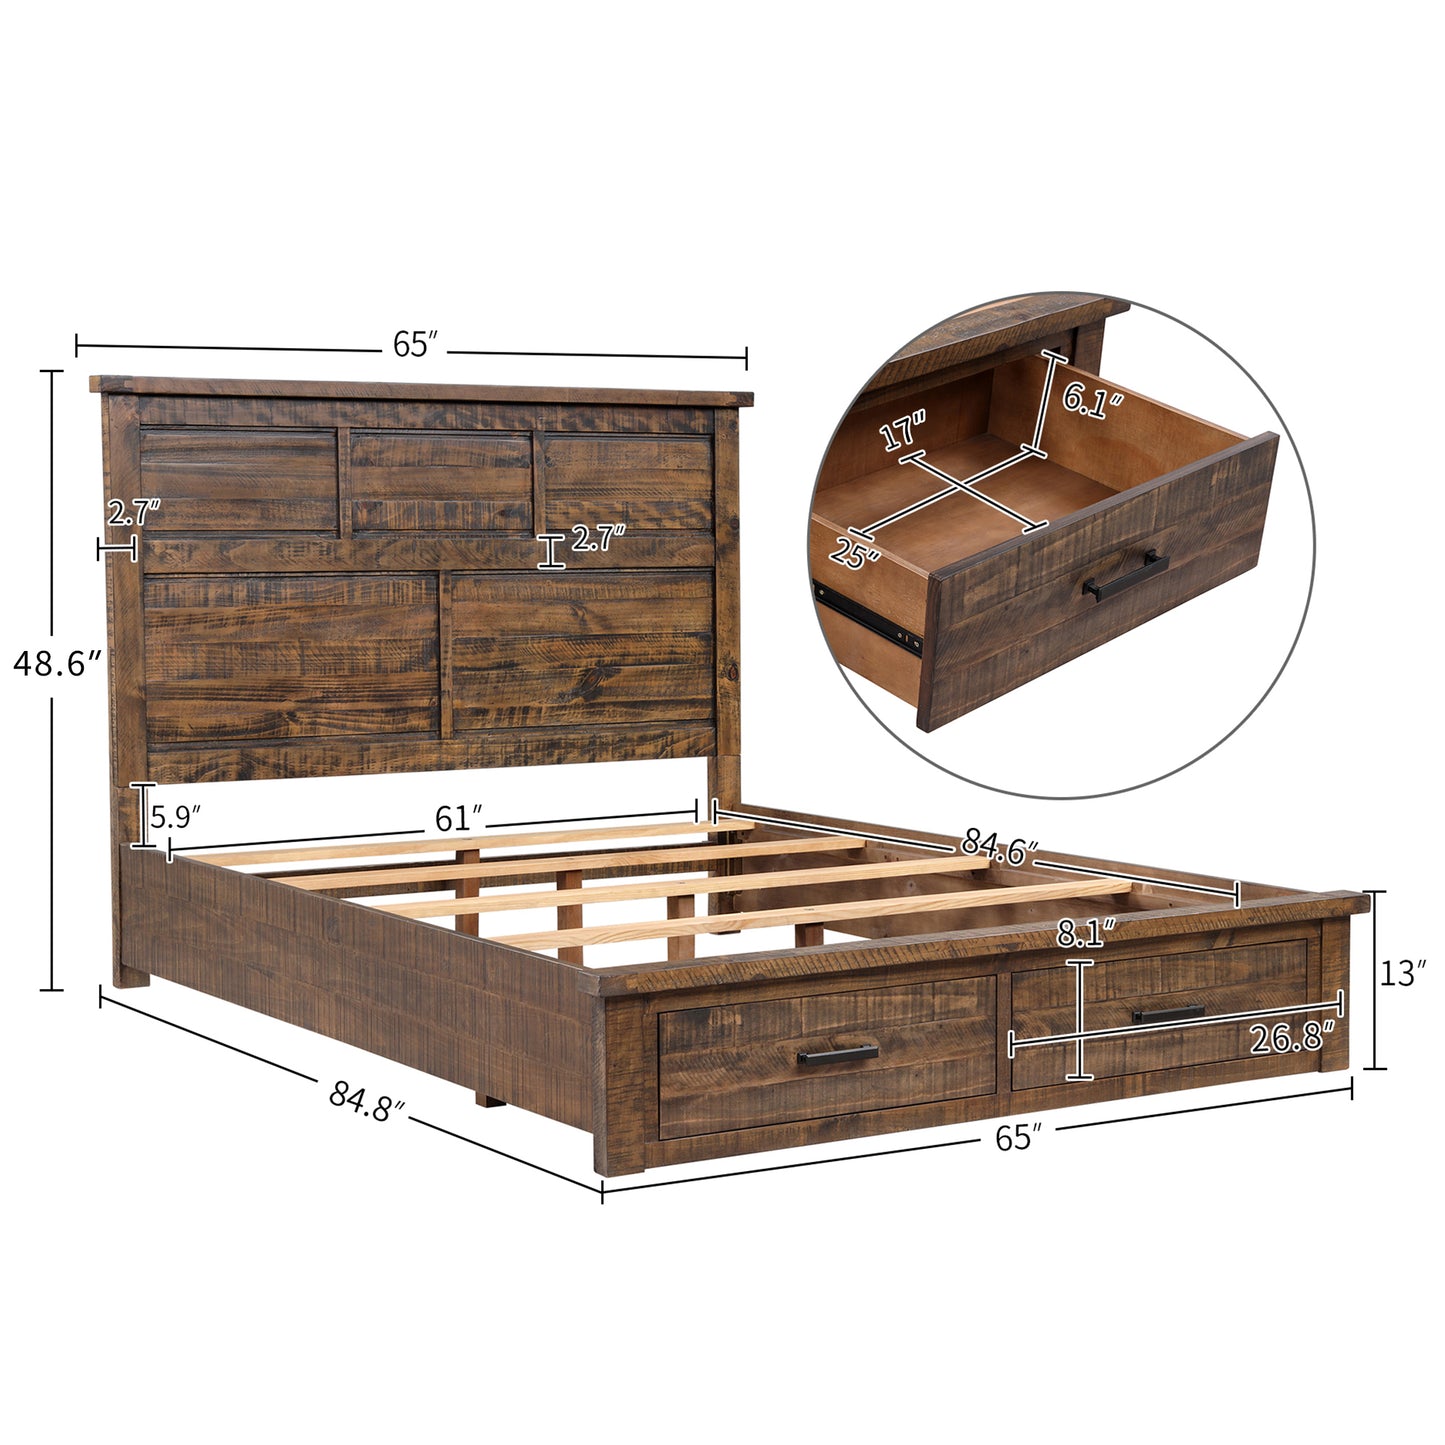 Rustic Reclaimed Solid Wood Framhouse Storage Queen Panel Bed